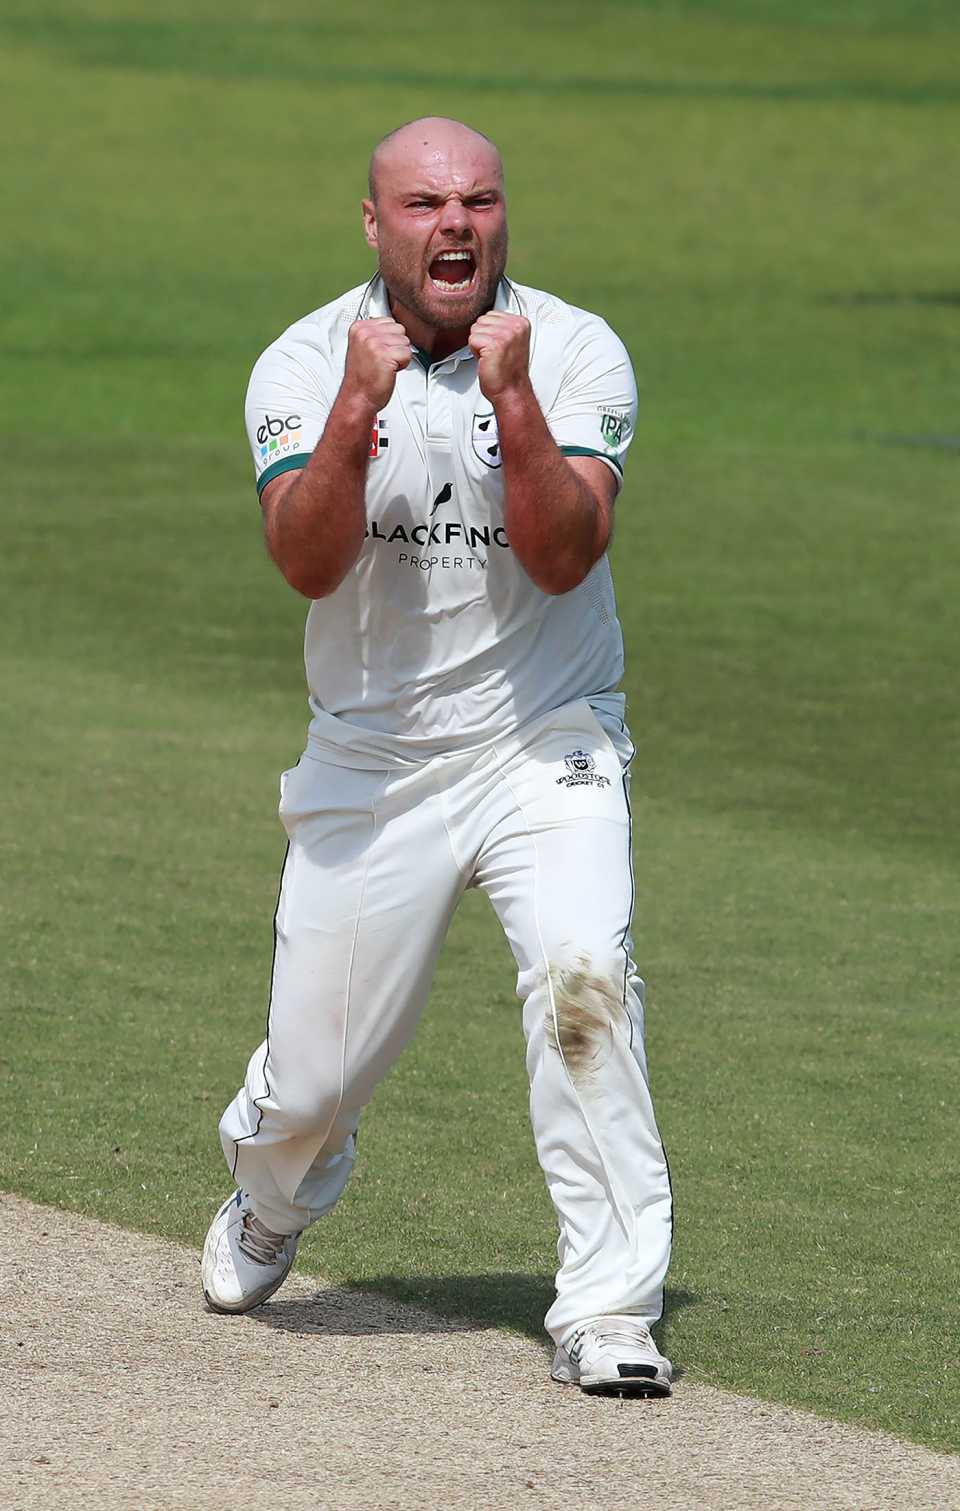 Joe Leach bellows his approval at winning a decision, Northamptonshire v Worcestershire, Bob Willis Trophy, Wantage Road, August 18, 2020